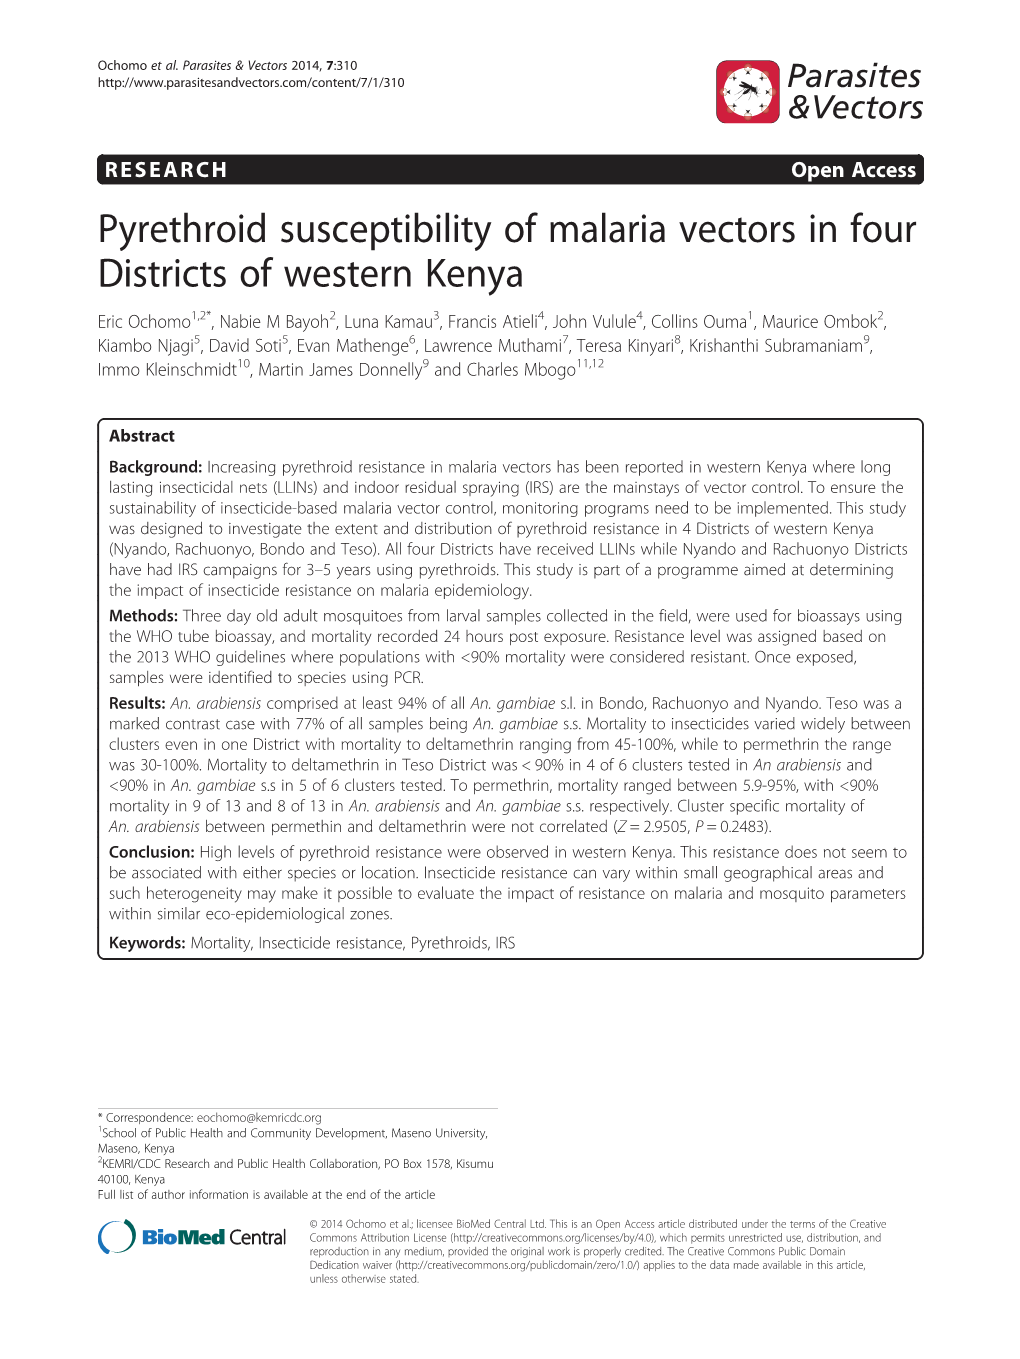 Pyrethroid Susceptibility of Malaria Vectors in Four Districts of Western Kenya